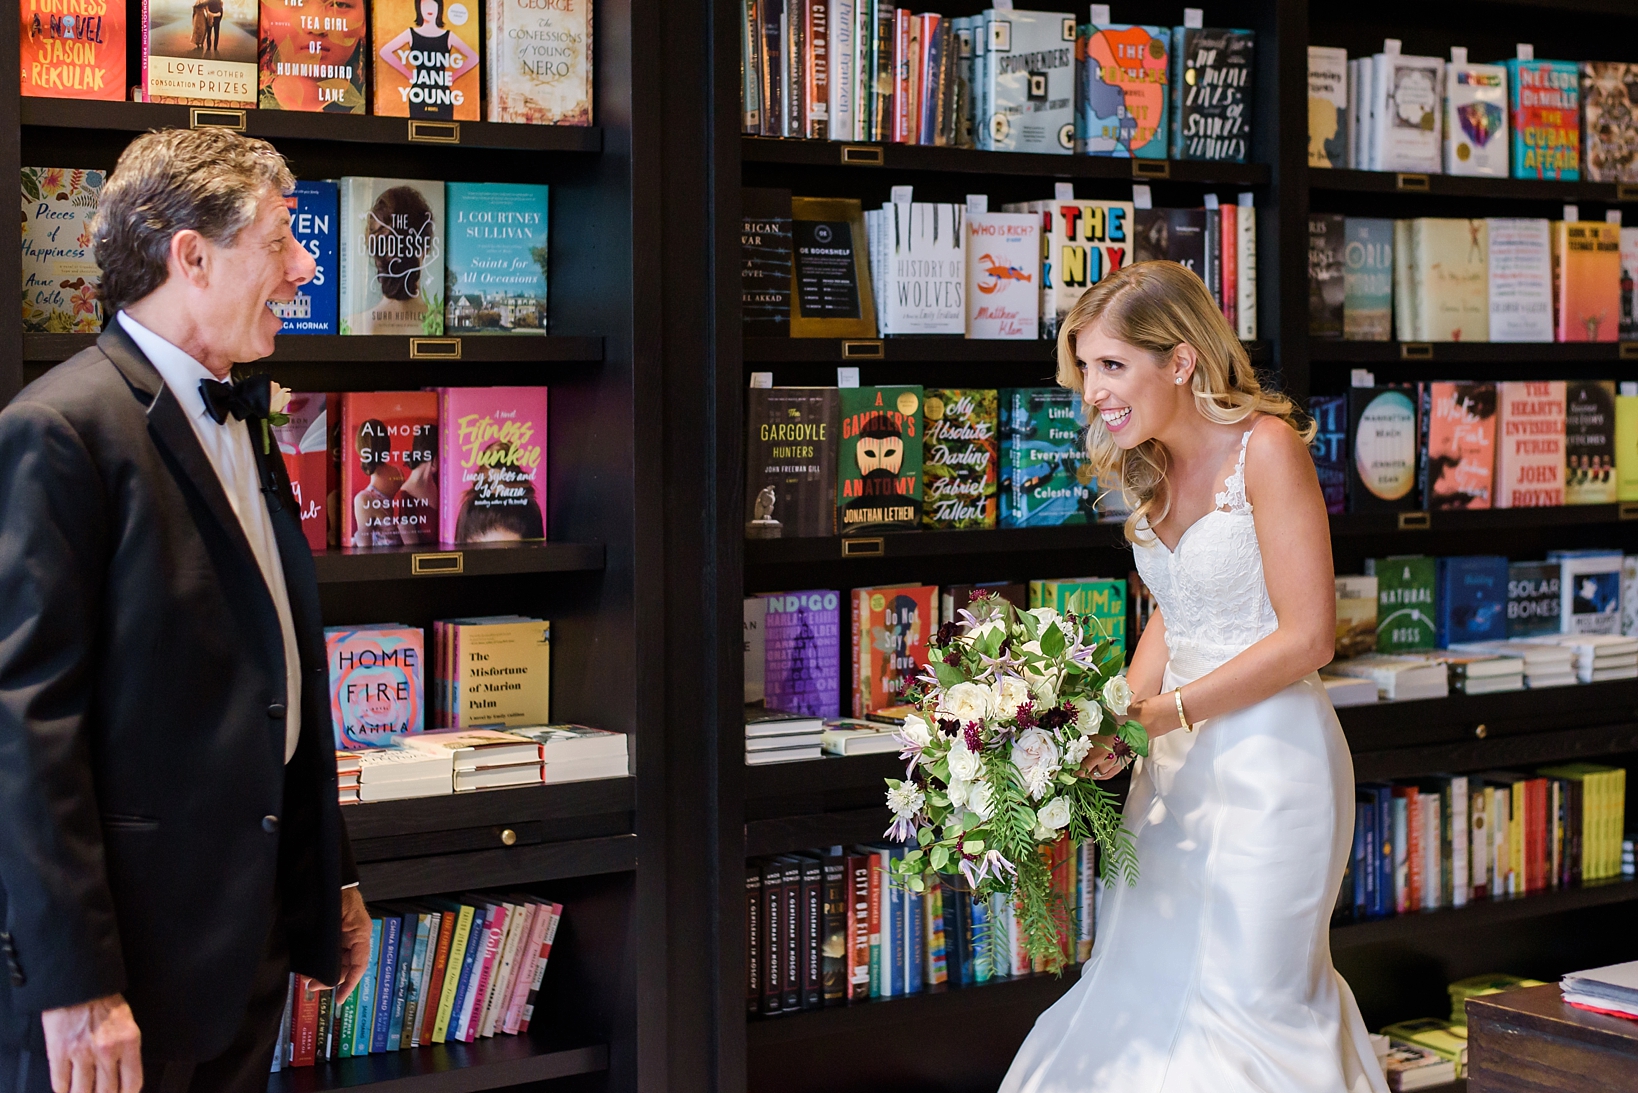 Father of the Bride sees his girl for the first time in her wedding dress in the library of Oxford Exchange